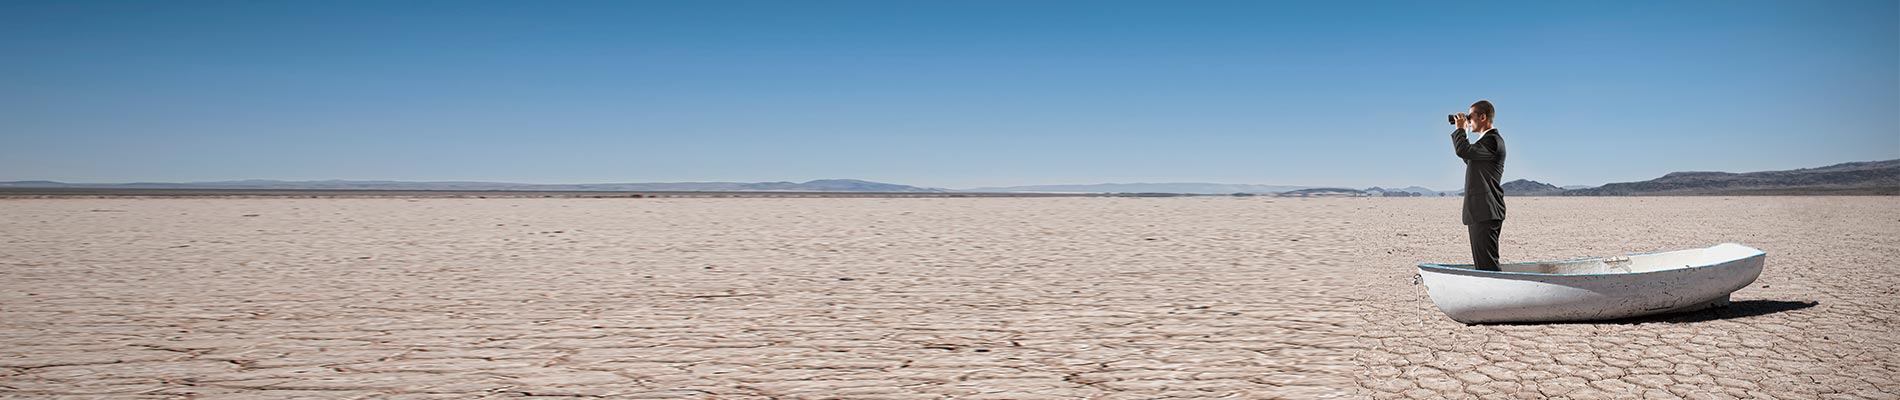 A man in a suit looking through field glasses standing in a boat on a dry lake bed